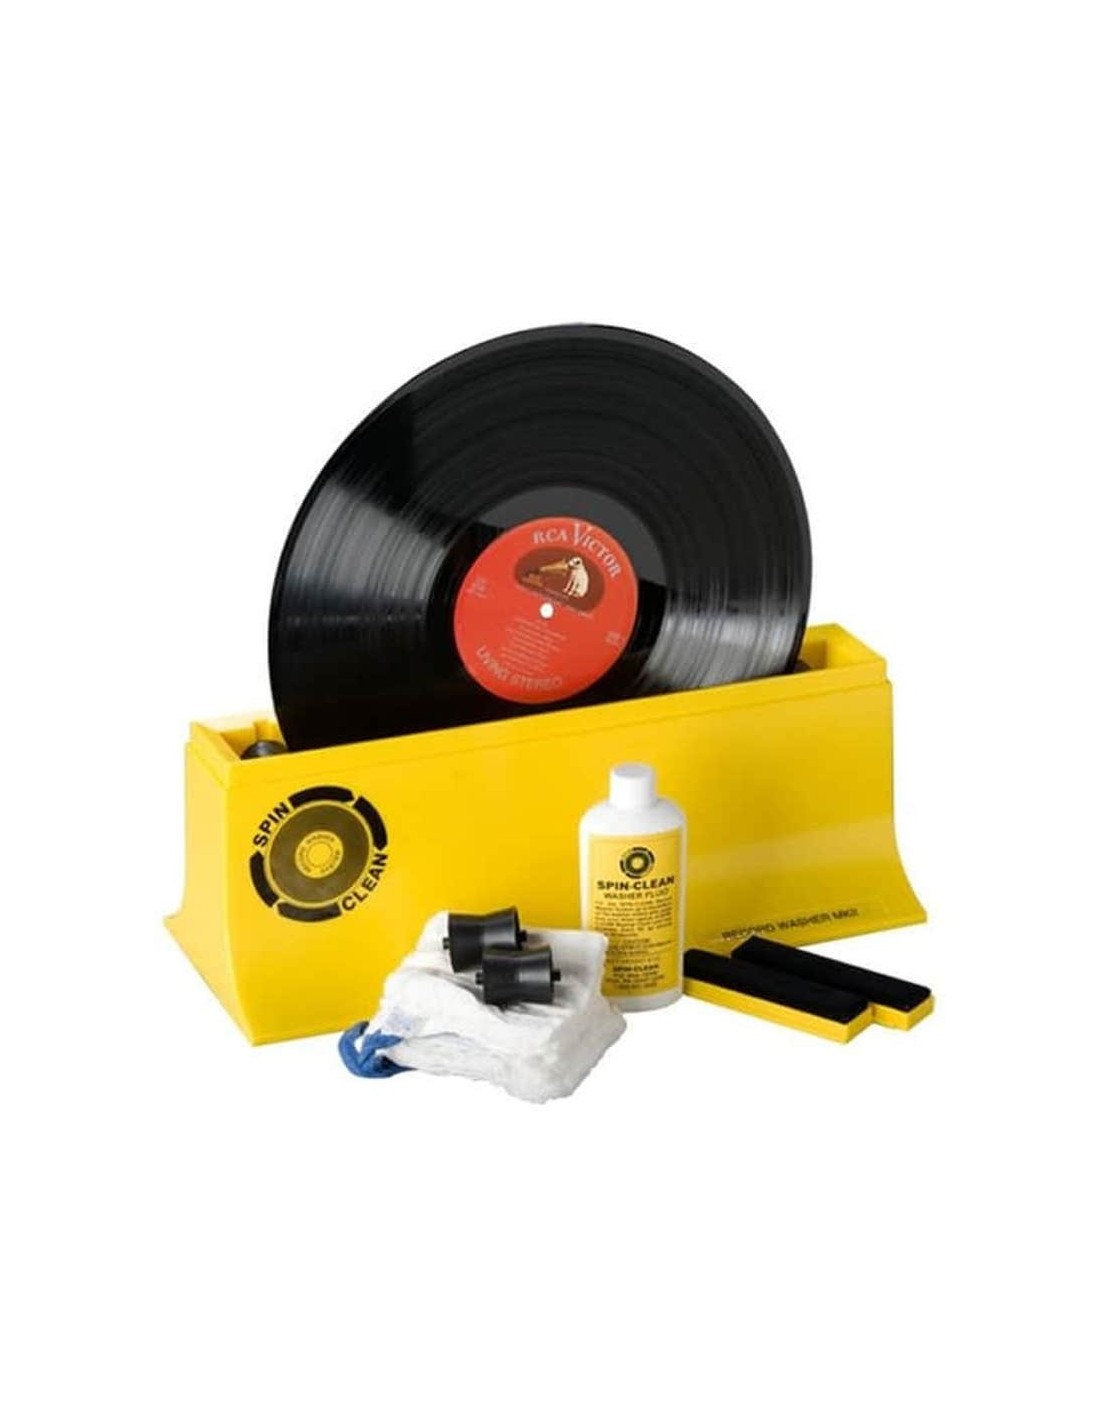 Pro-Ject Spin Clean Record Washer MKII - Nettoyant Vinyle - Jaune